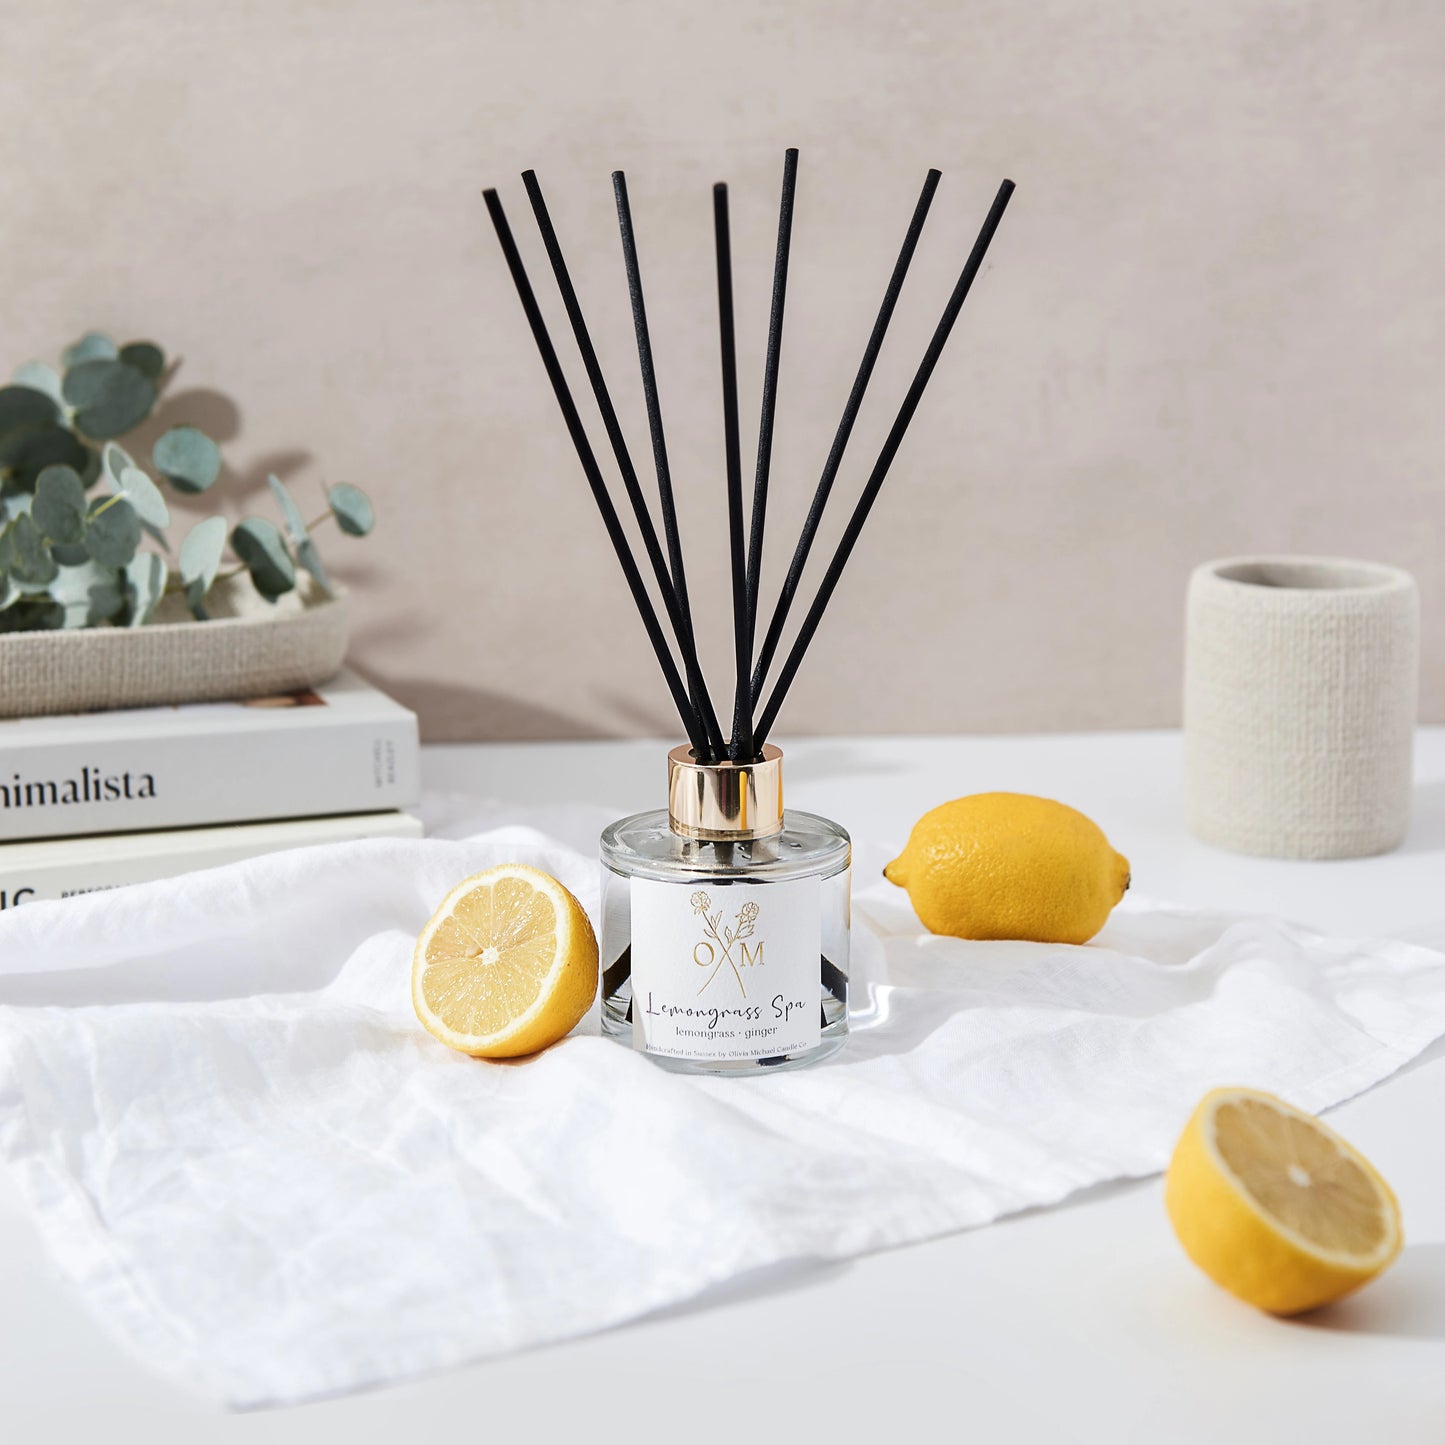 Our lemongrass and ginger diffuser is on display in a clear glass jar.